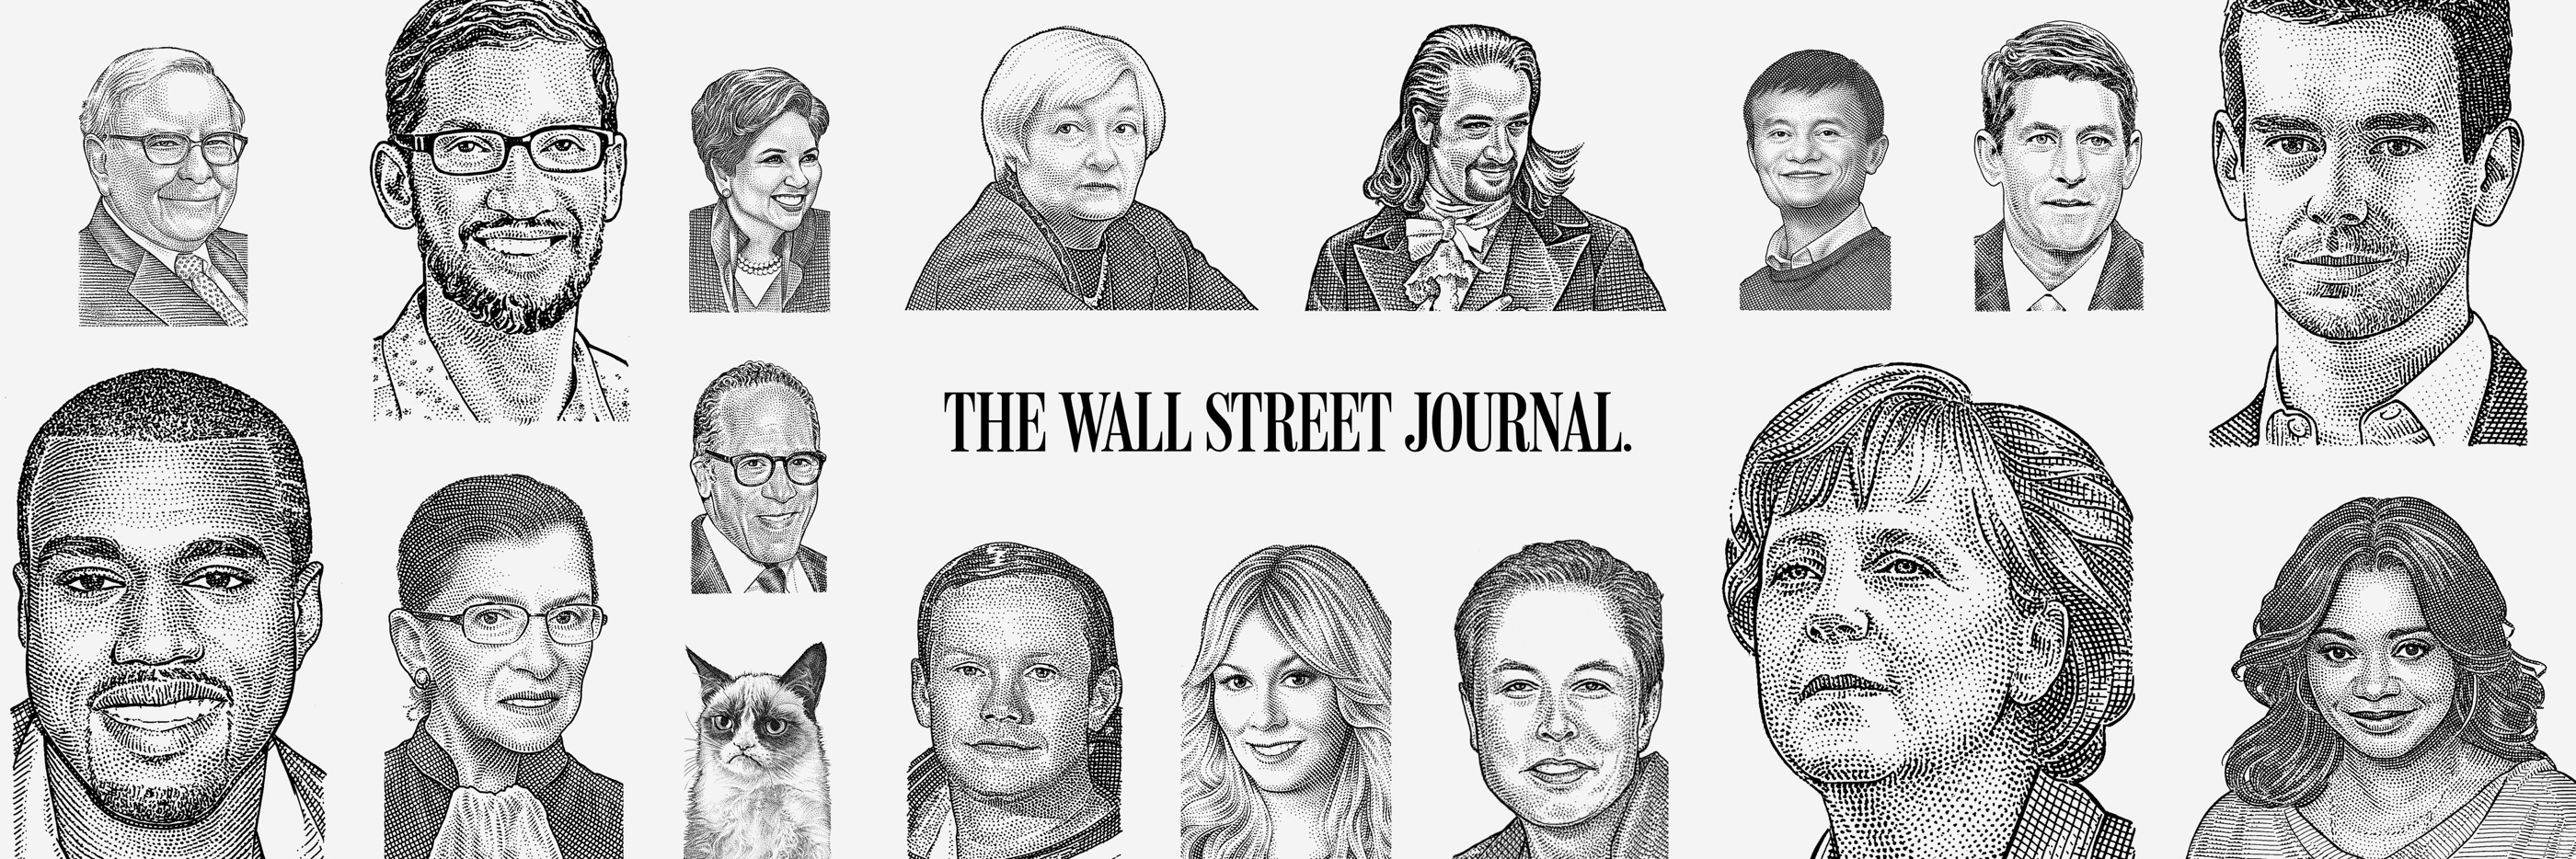 Banner featuring public figures illustrated in the iconic WSJ stipple style. Used for Facebook and Twitter branding.